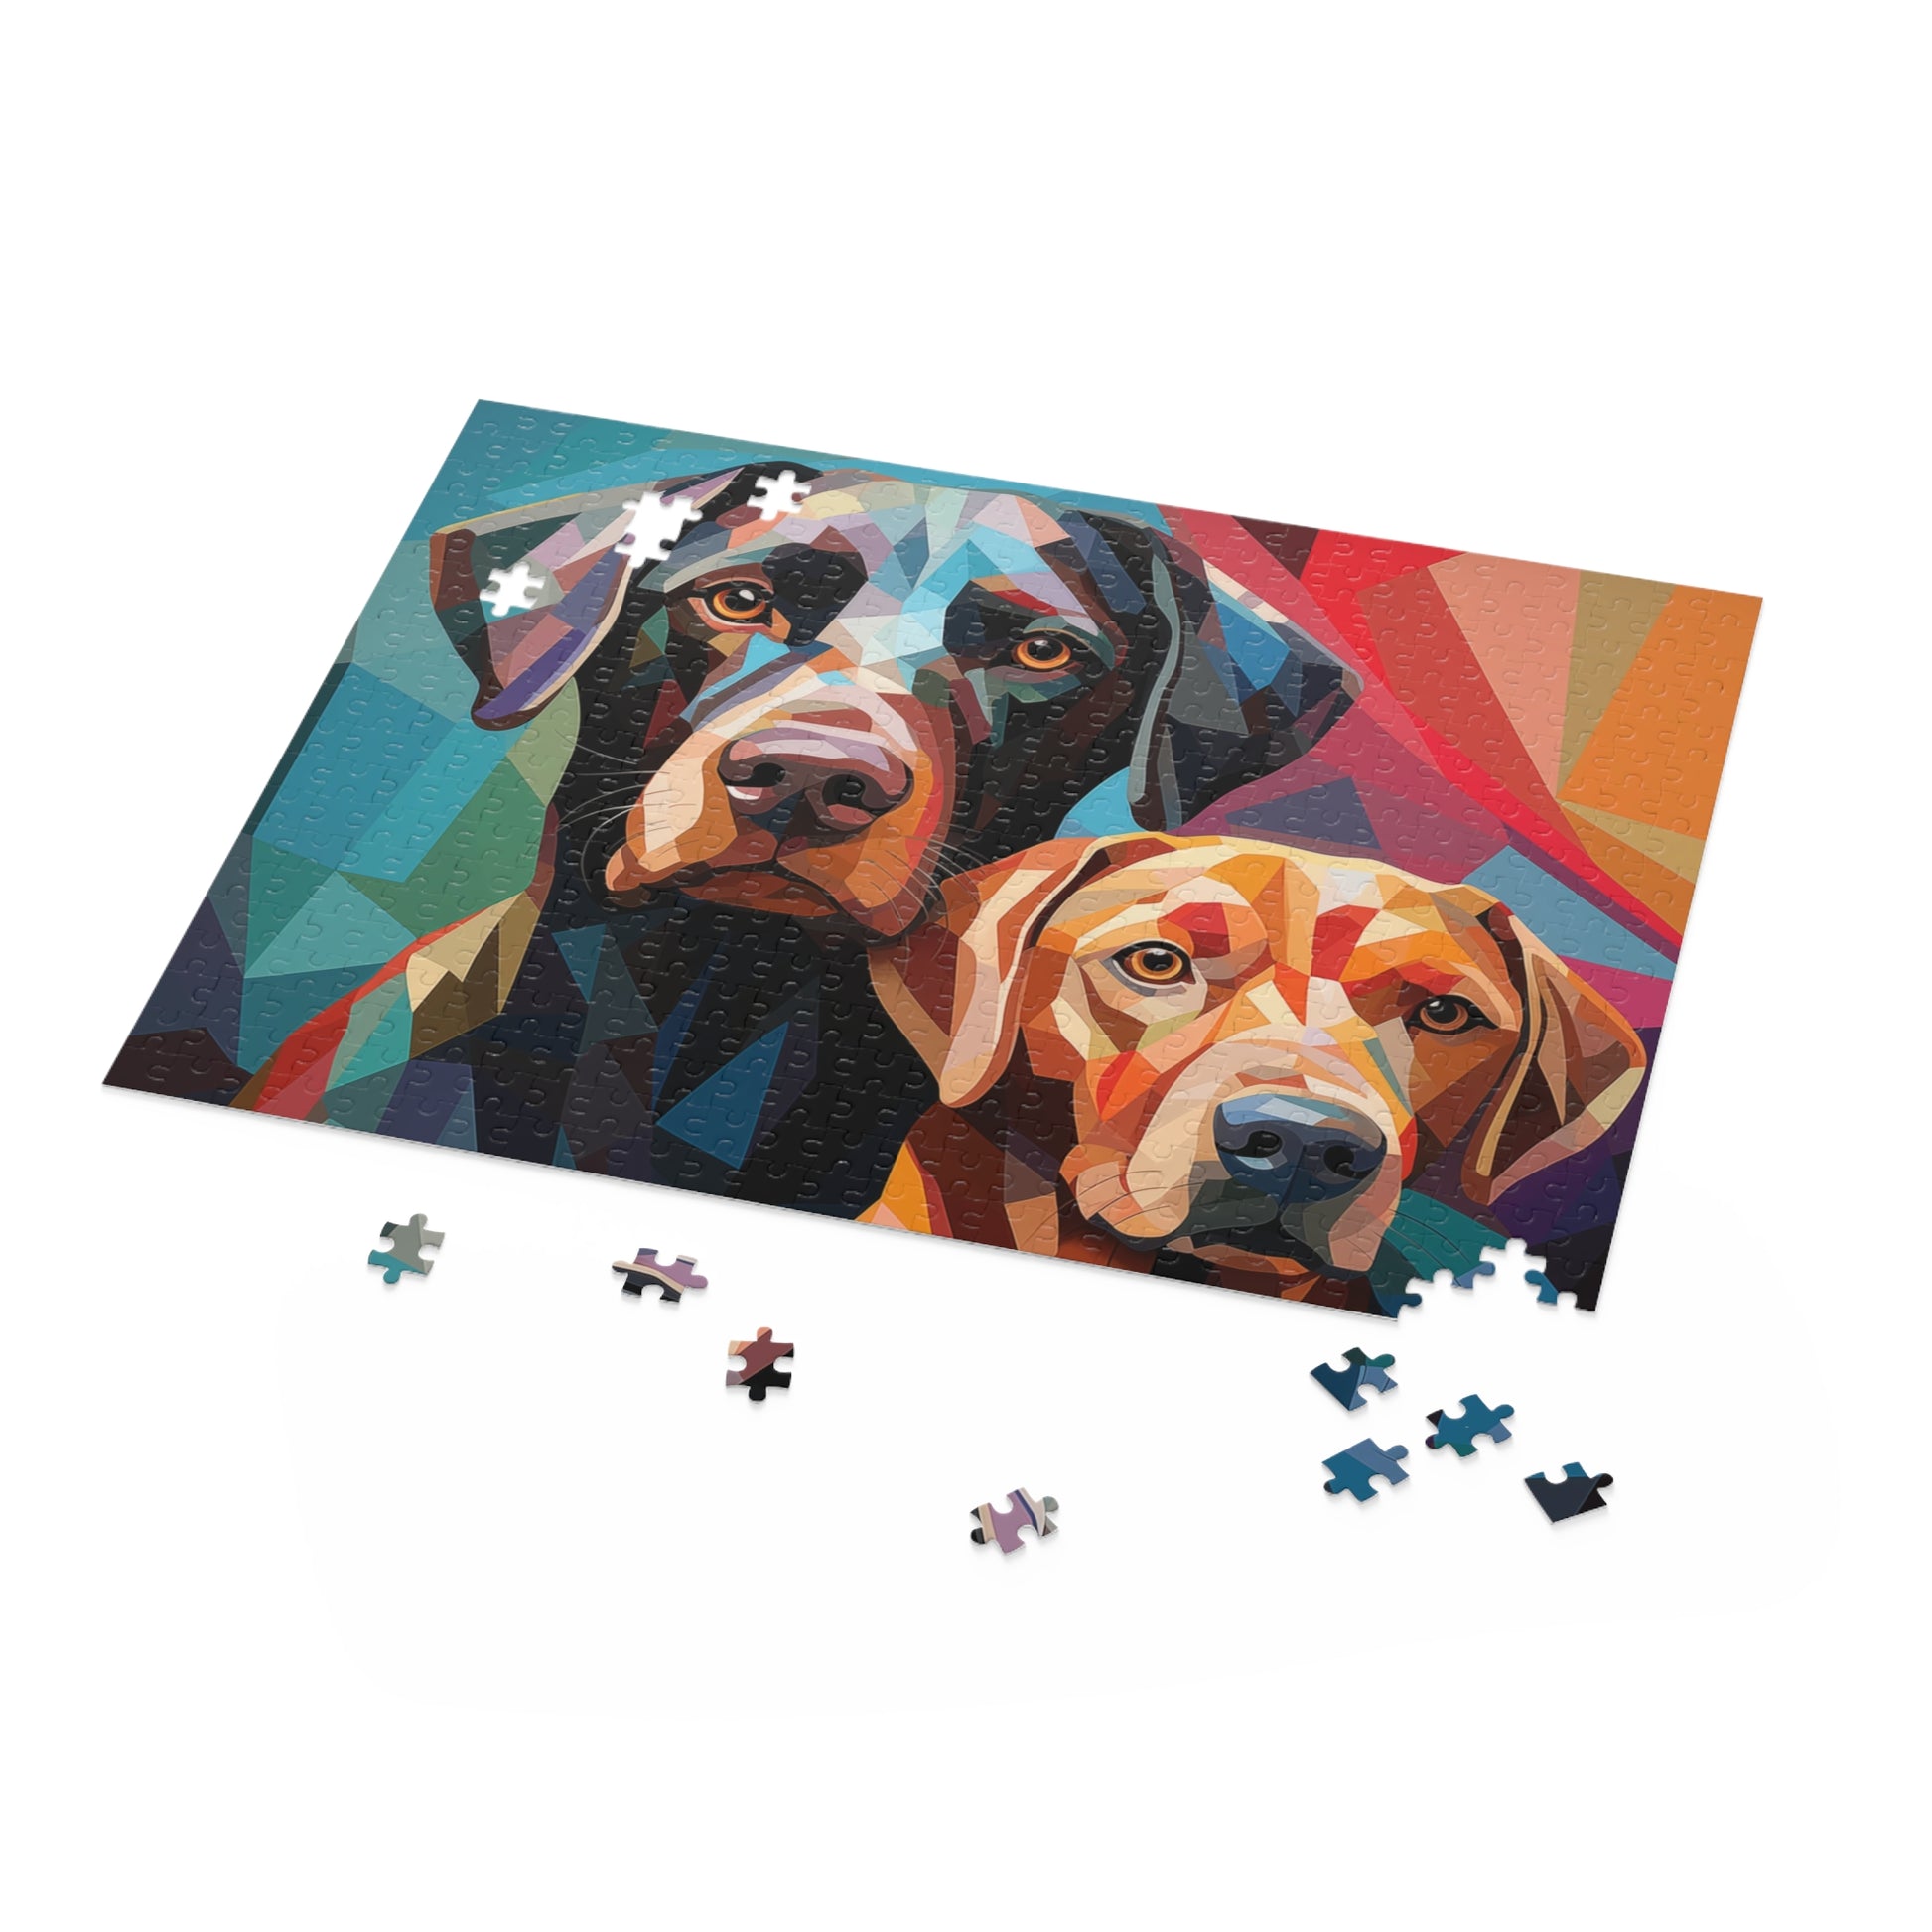 Labrador Abstract Dog Vibrant Jigsaw Puzzle Adult Birthday Business Jigsaw Puzzle Gift for Him Funny Humorous Indoor Outdoor Game Gift For Her Online-5